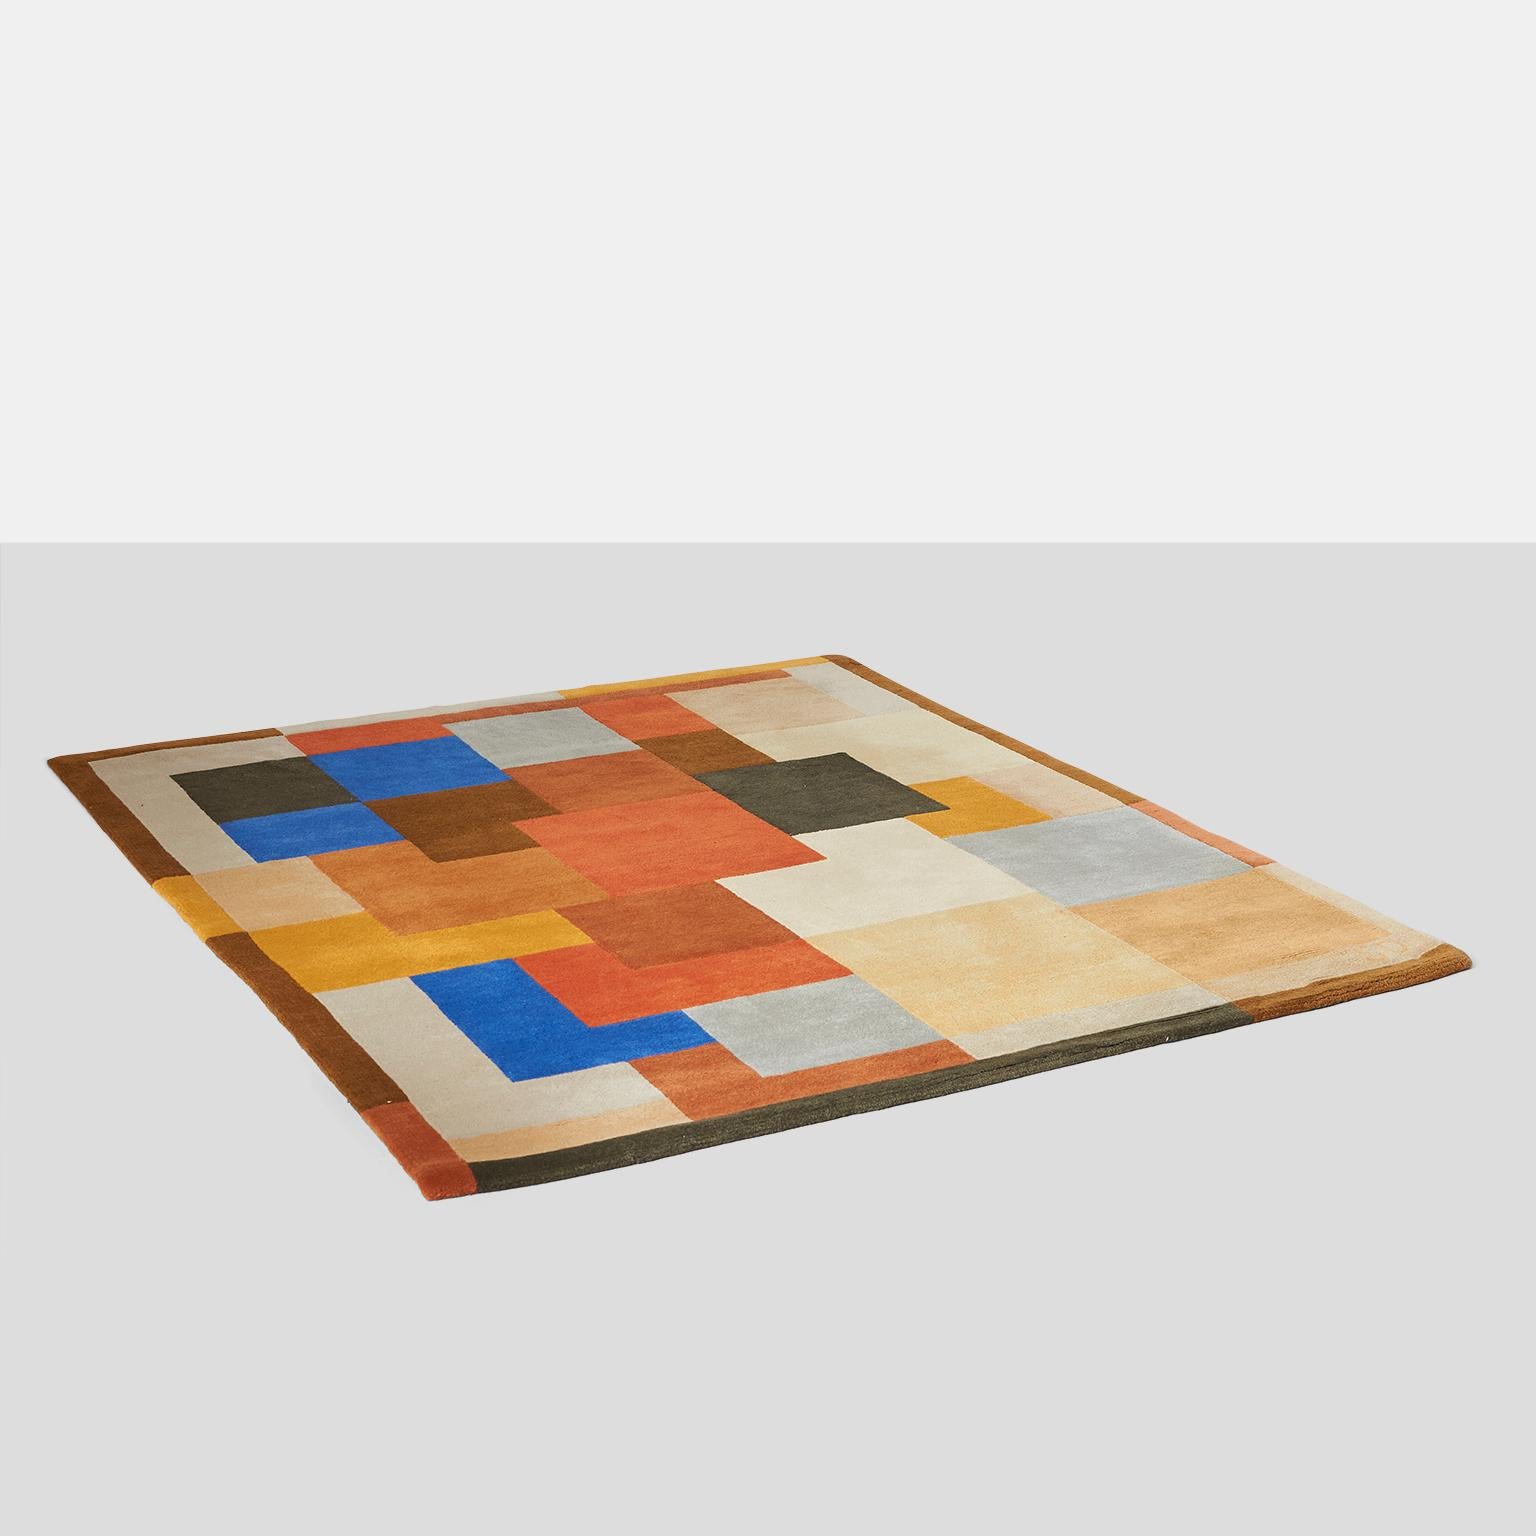 “Labrinthe” by Sonia Delaunay
A hand tufted wool area rug in a geometric Art Deco pattern. Signed with SD initials on the lower right hand corner. Designed from an earlier pattern made famous by Sonia, 
France, circa 1975.